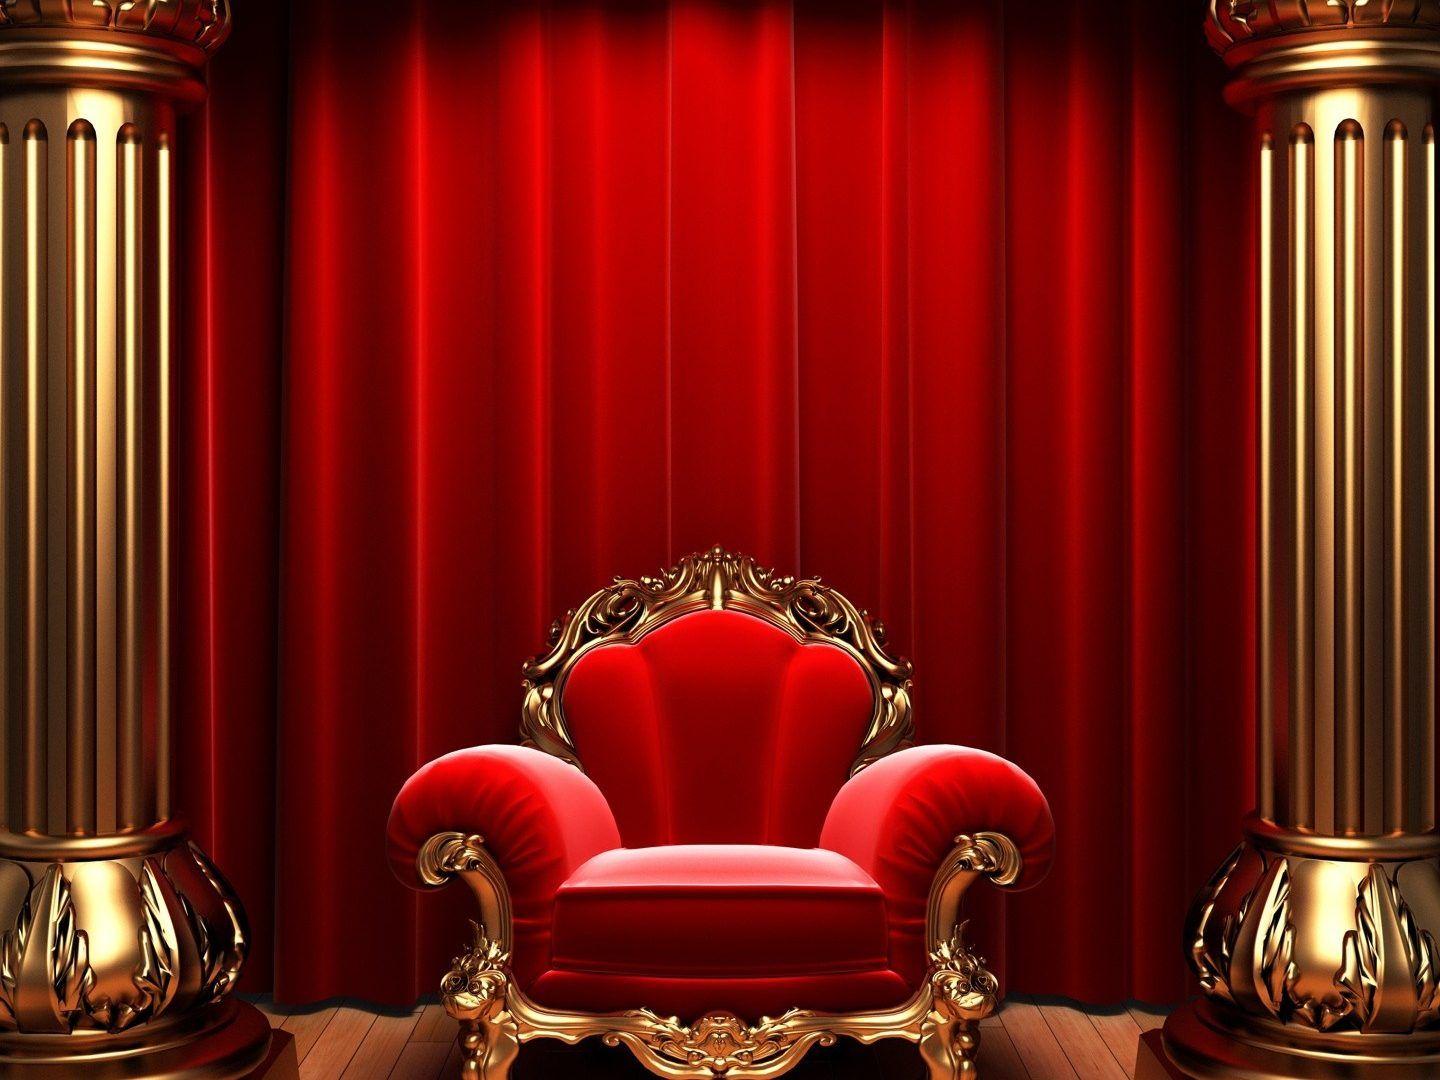  King  Throne Backgrounds  Wallpaper  Cave